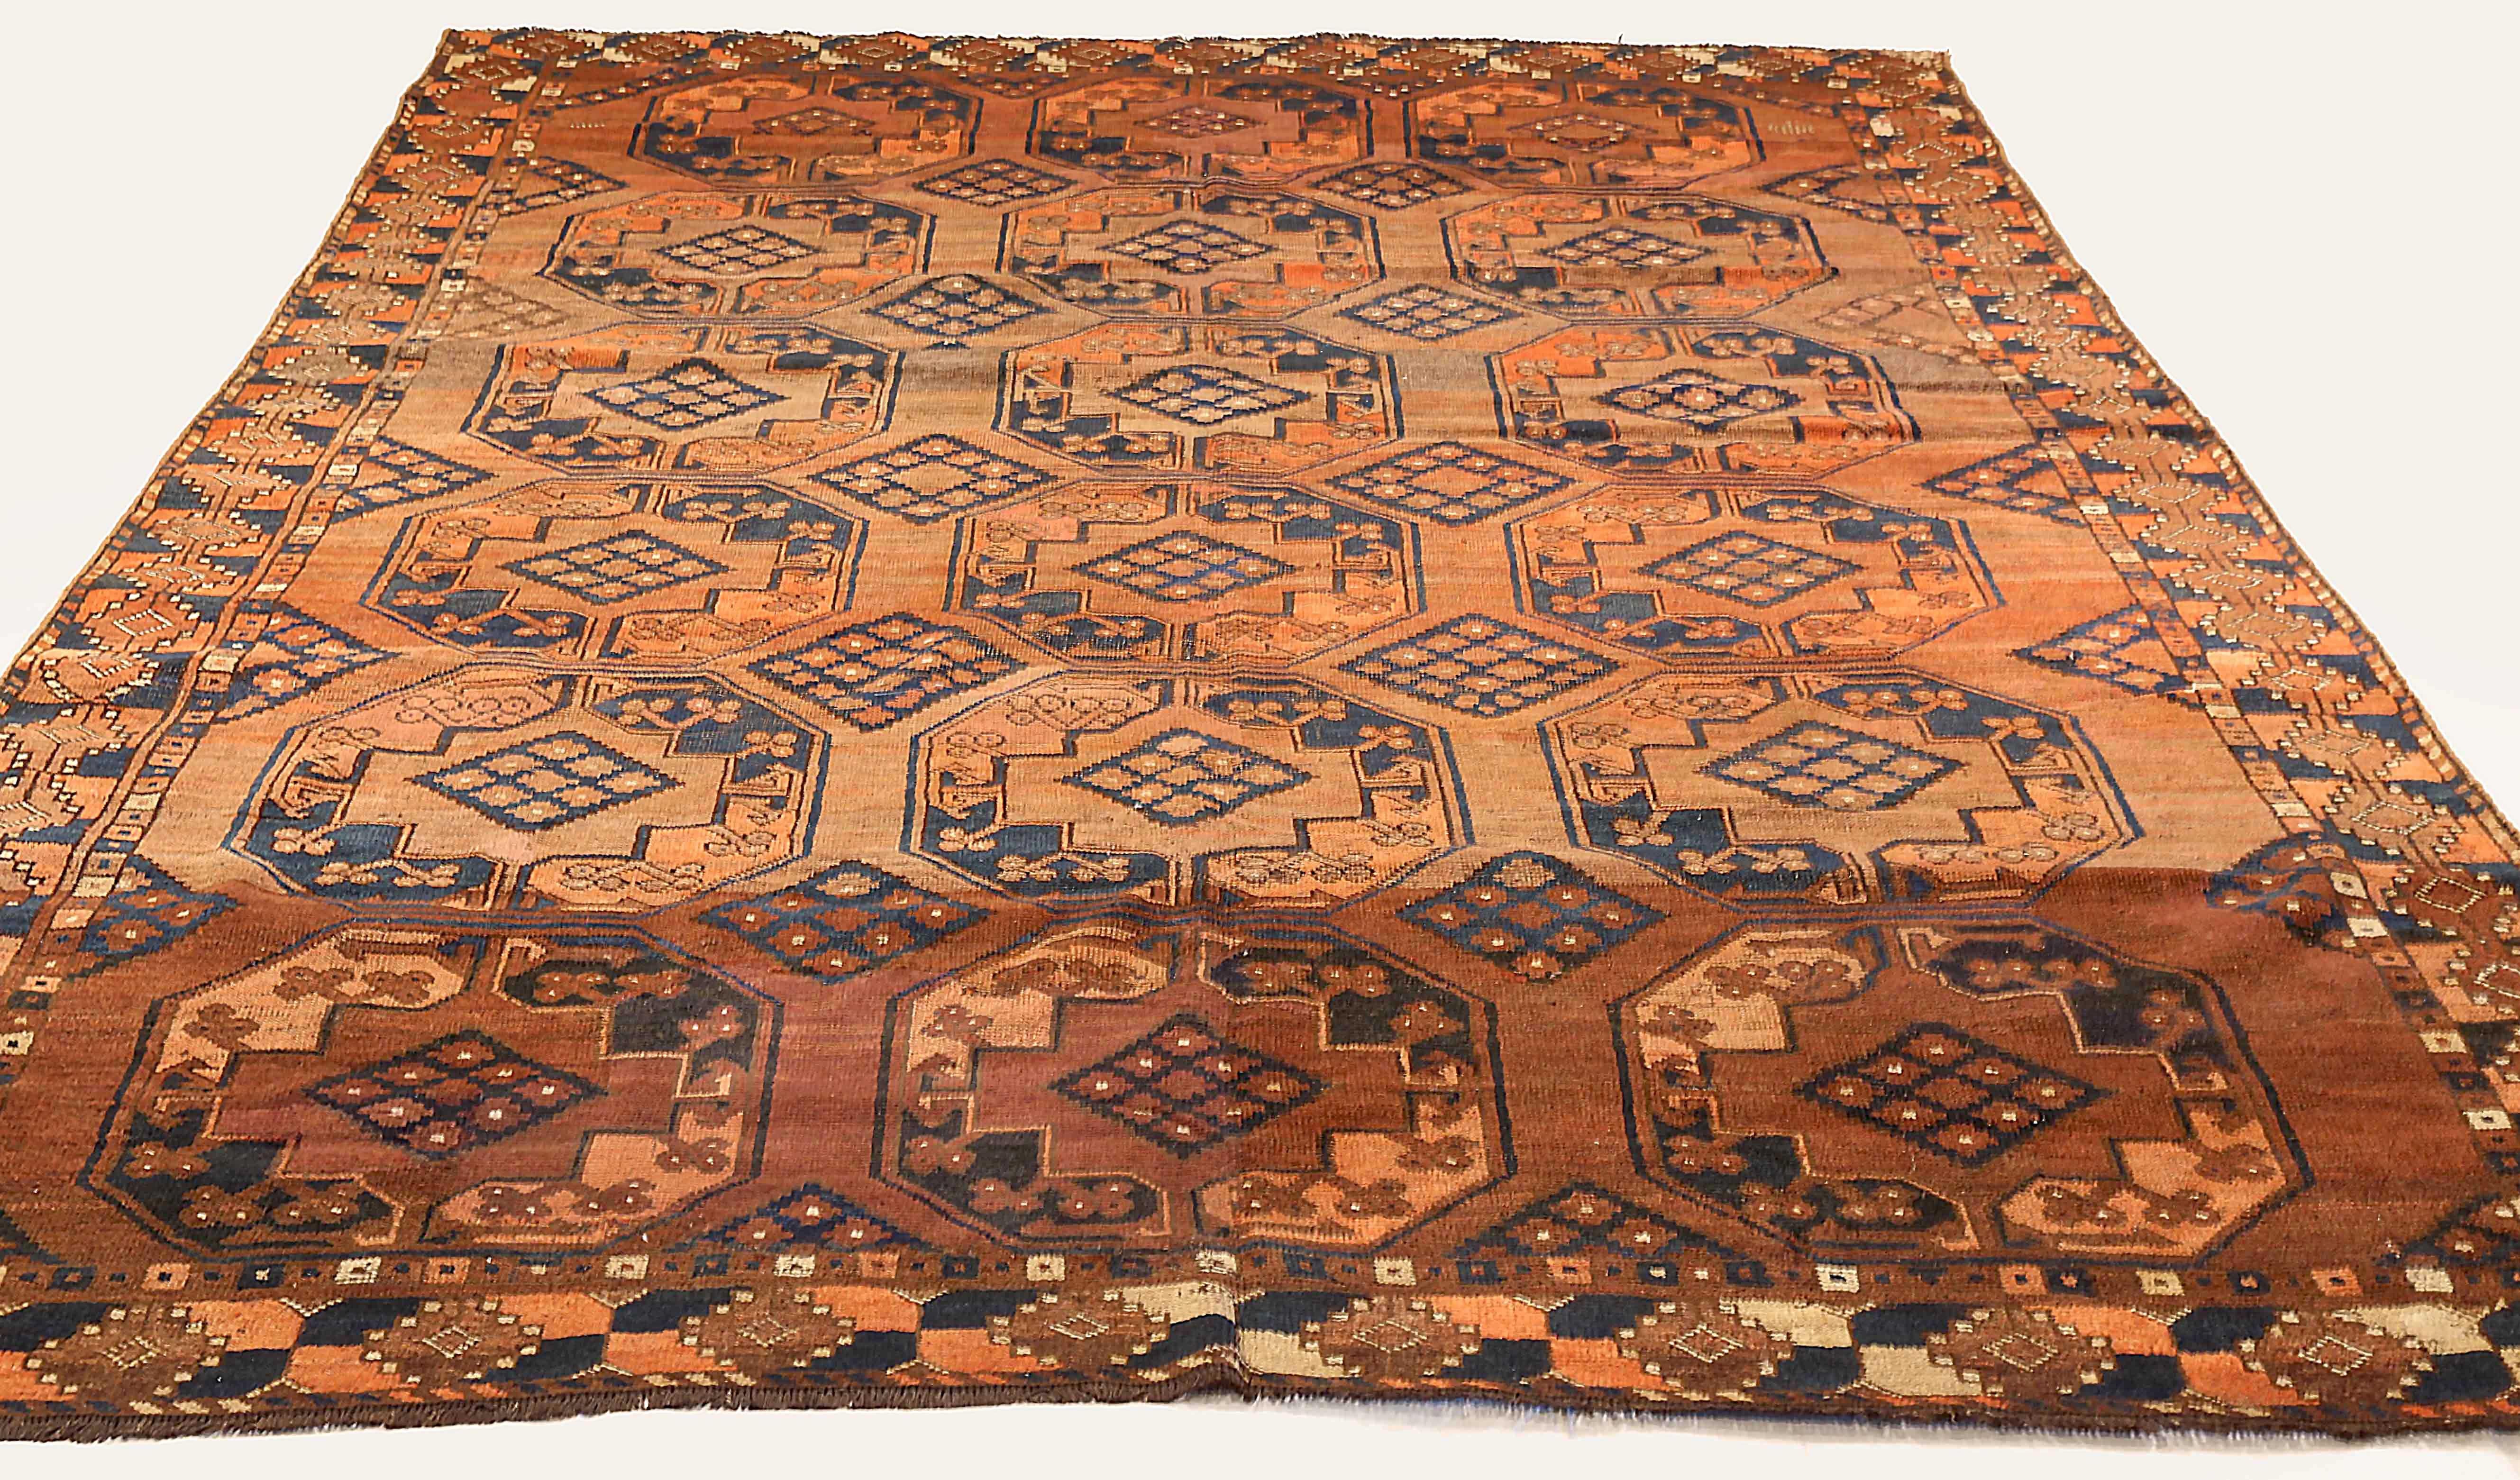 Antique Afghan area rug handwoven from the finest sheep’s wool. It’s colored with all-natural vegetable dyes that are safe for humans and pets. It’s a traditional Tekeh design handwoven by expert artisans.It’s a lovely area rug that can be